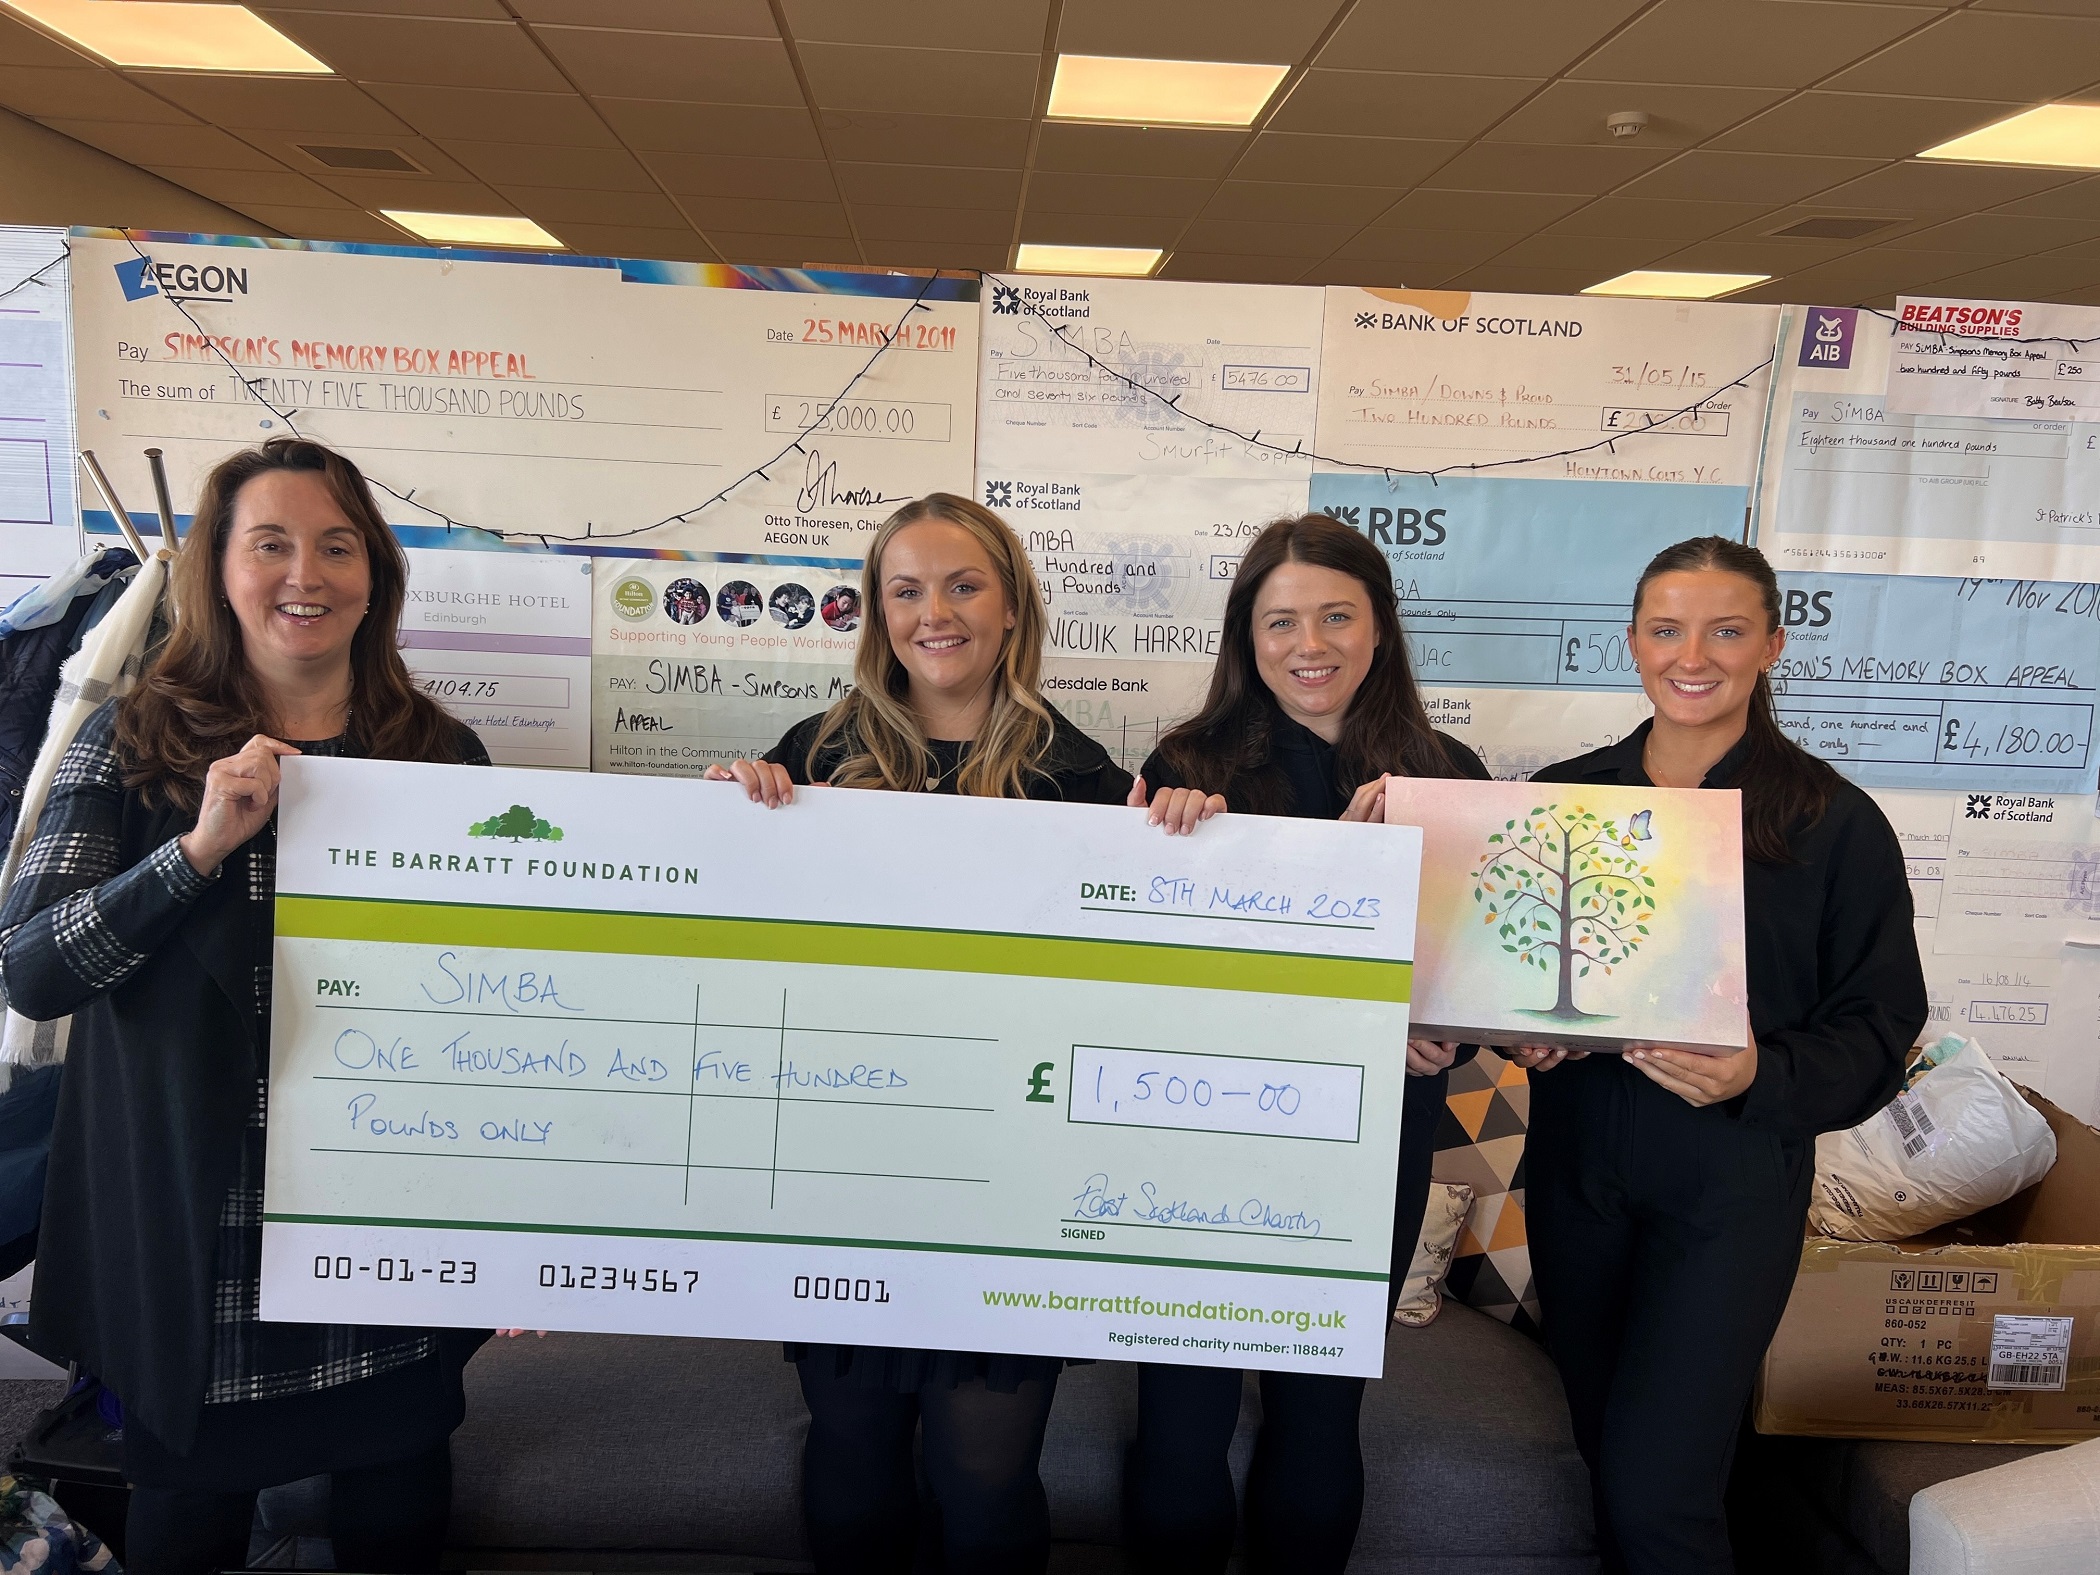 Barratt Developments supports women and families with East of Scotland community fund